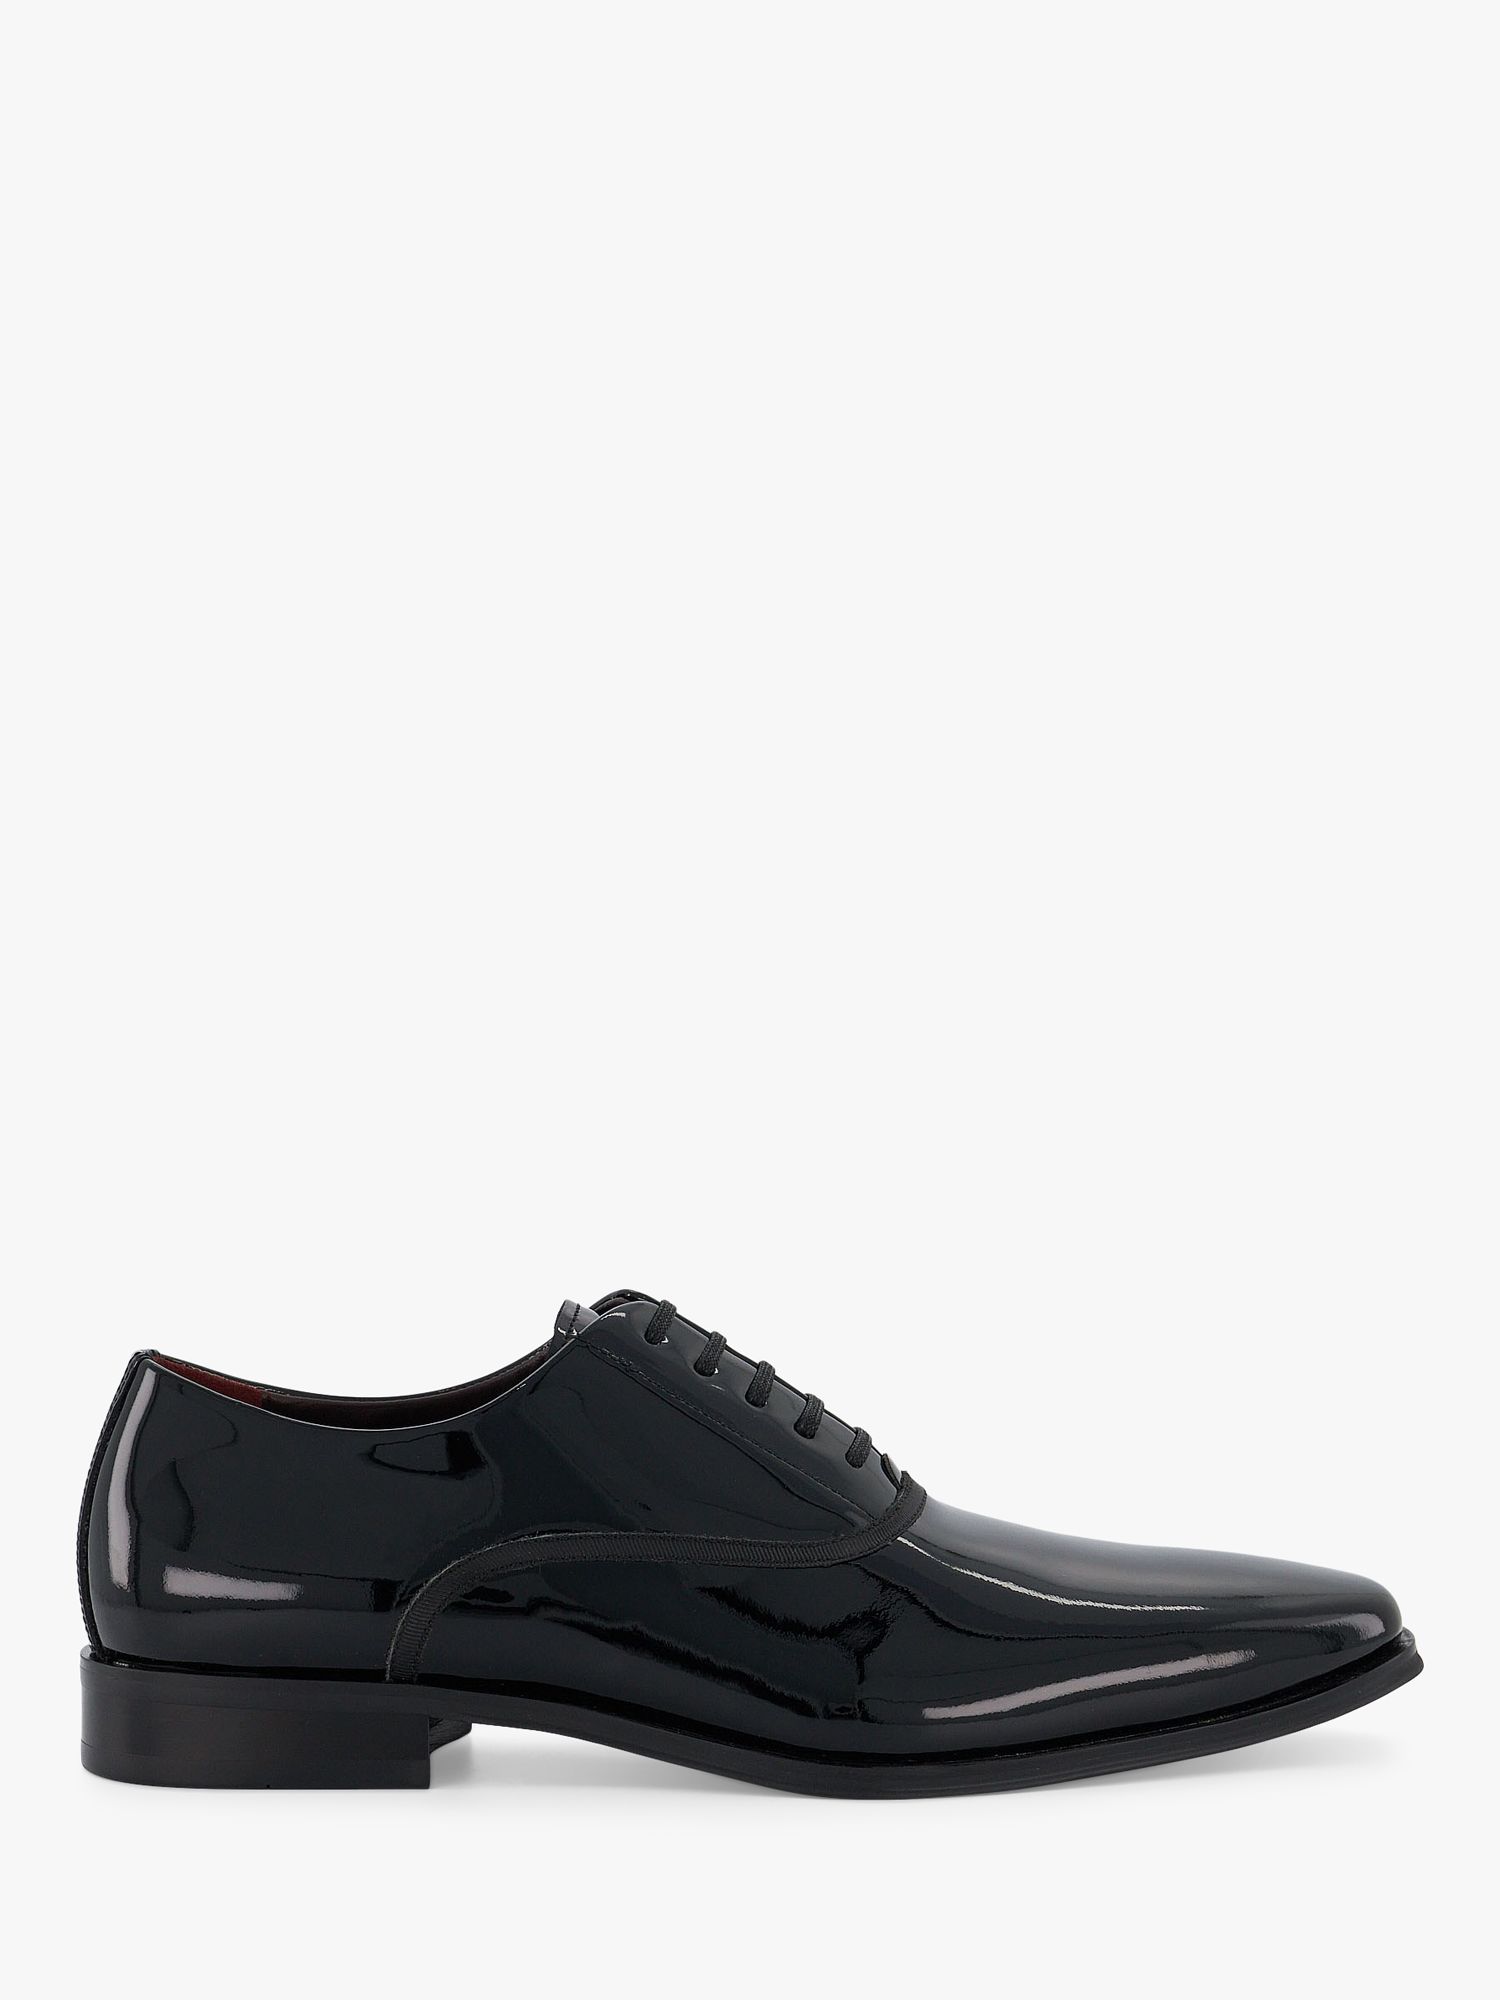 Dune Swallow Wide Fit Patent Leather Oxford Shoes, Black at John Lewis ...